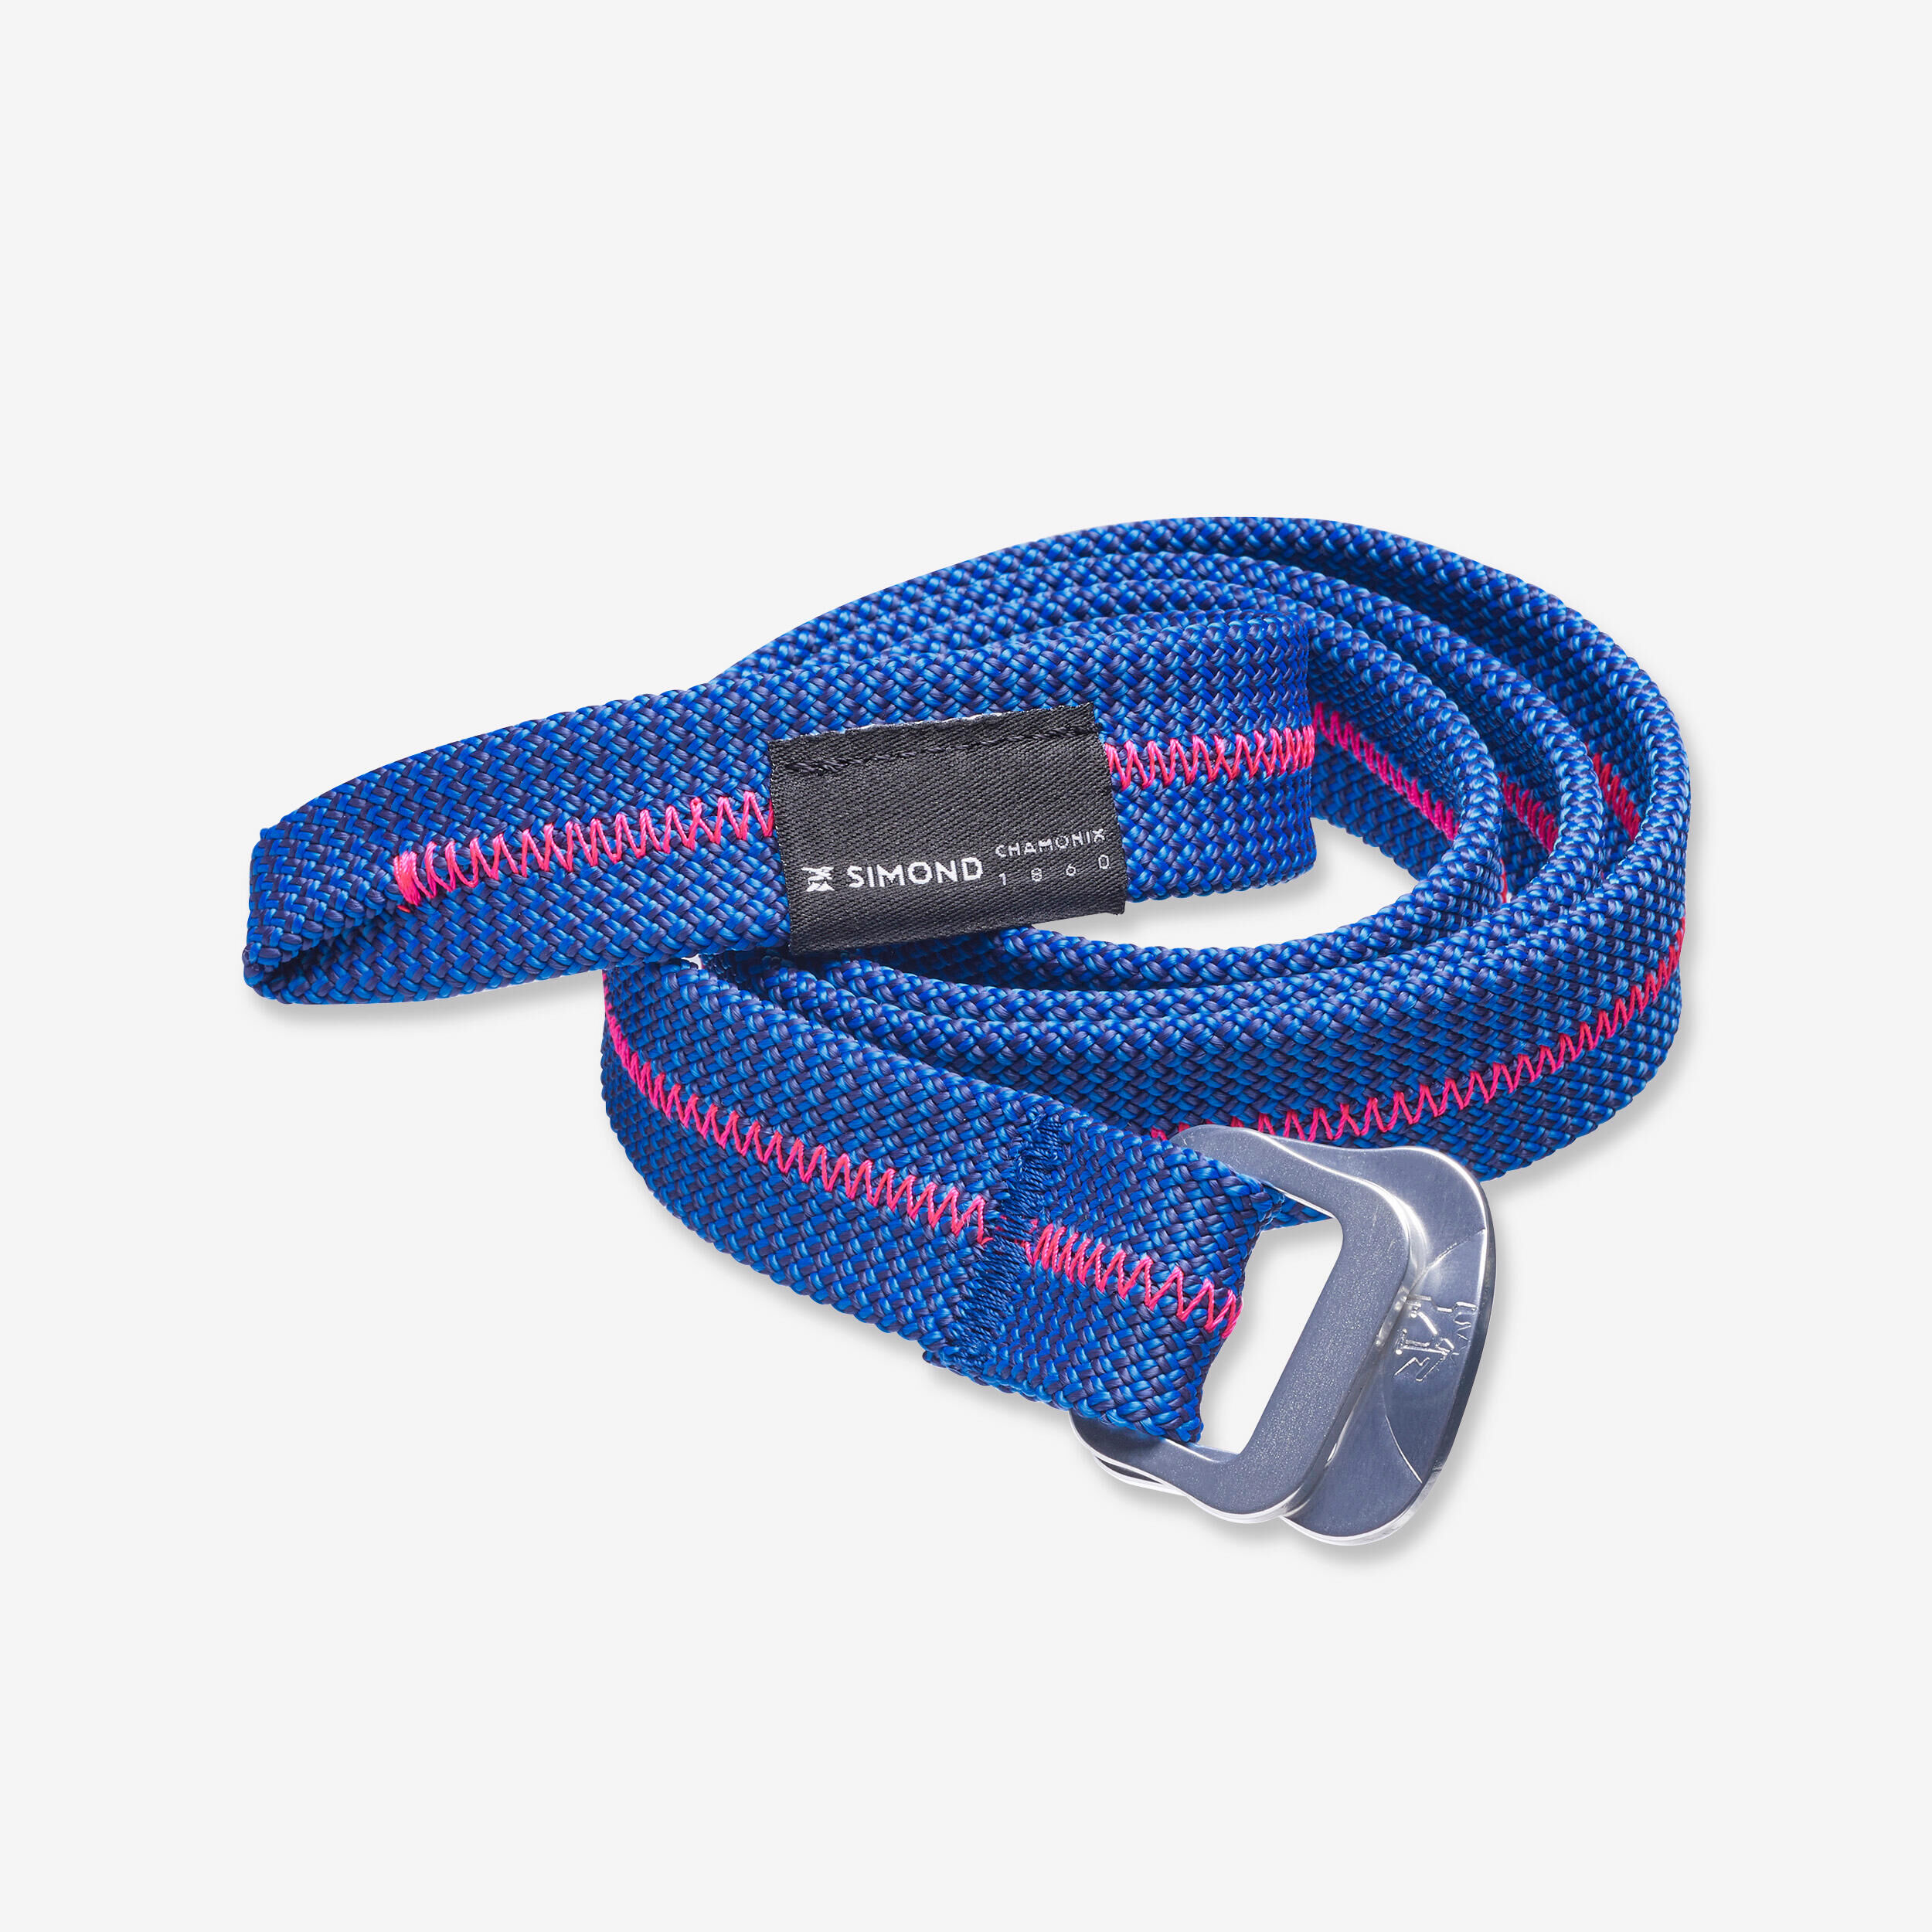 SIMOND UPCYCLED CLIMBING ROPE BELT - MADE IN FRANCE